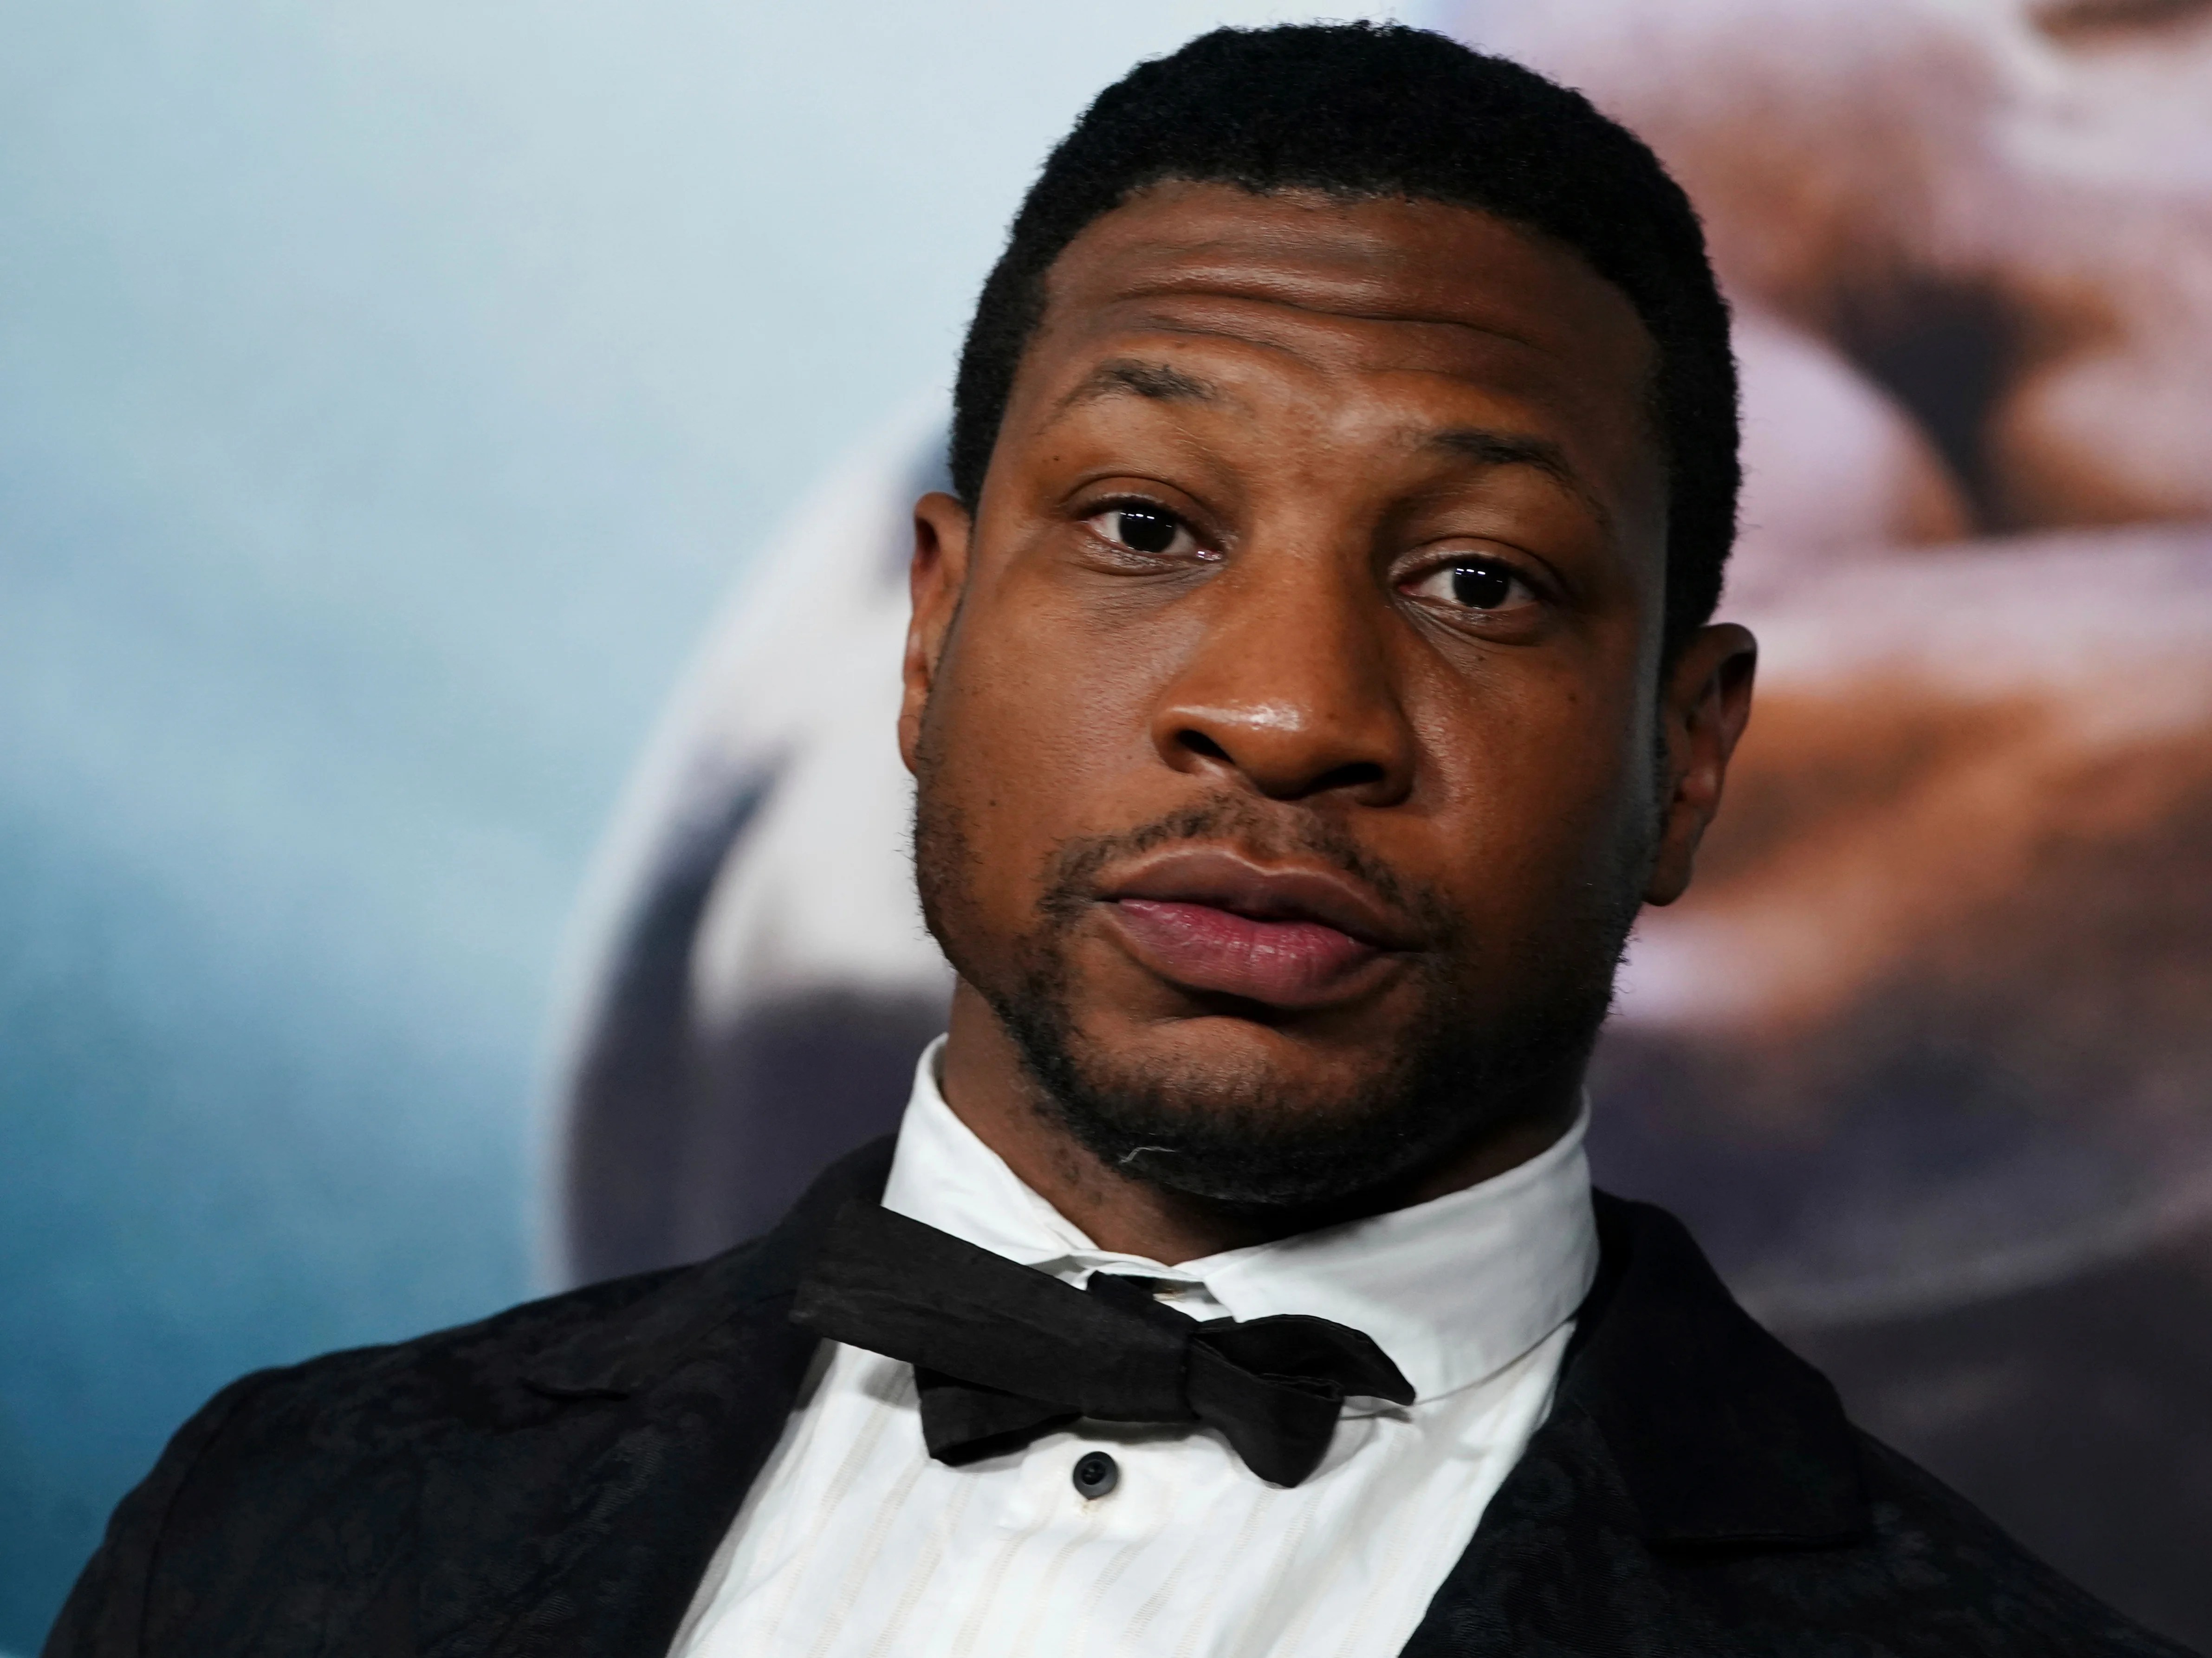 Jonathan Majors' lawyer says video proves he's 'innocent' of assault